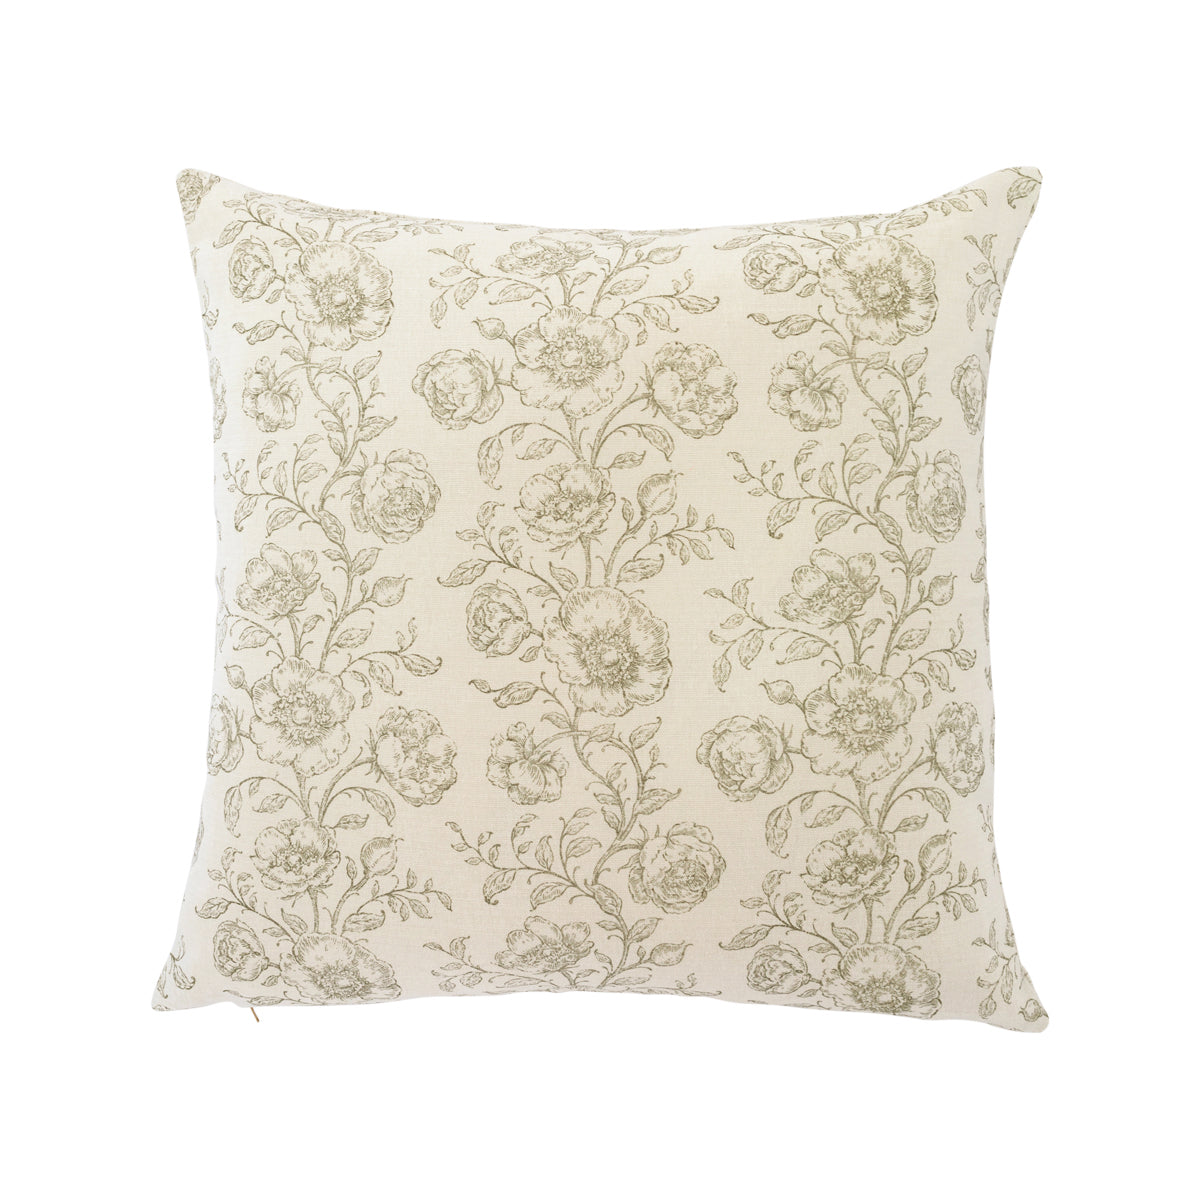 Mabel Pillow Cover - Olive - 22" x 22"